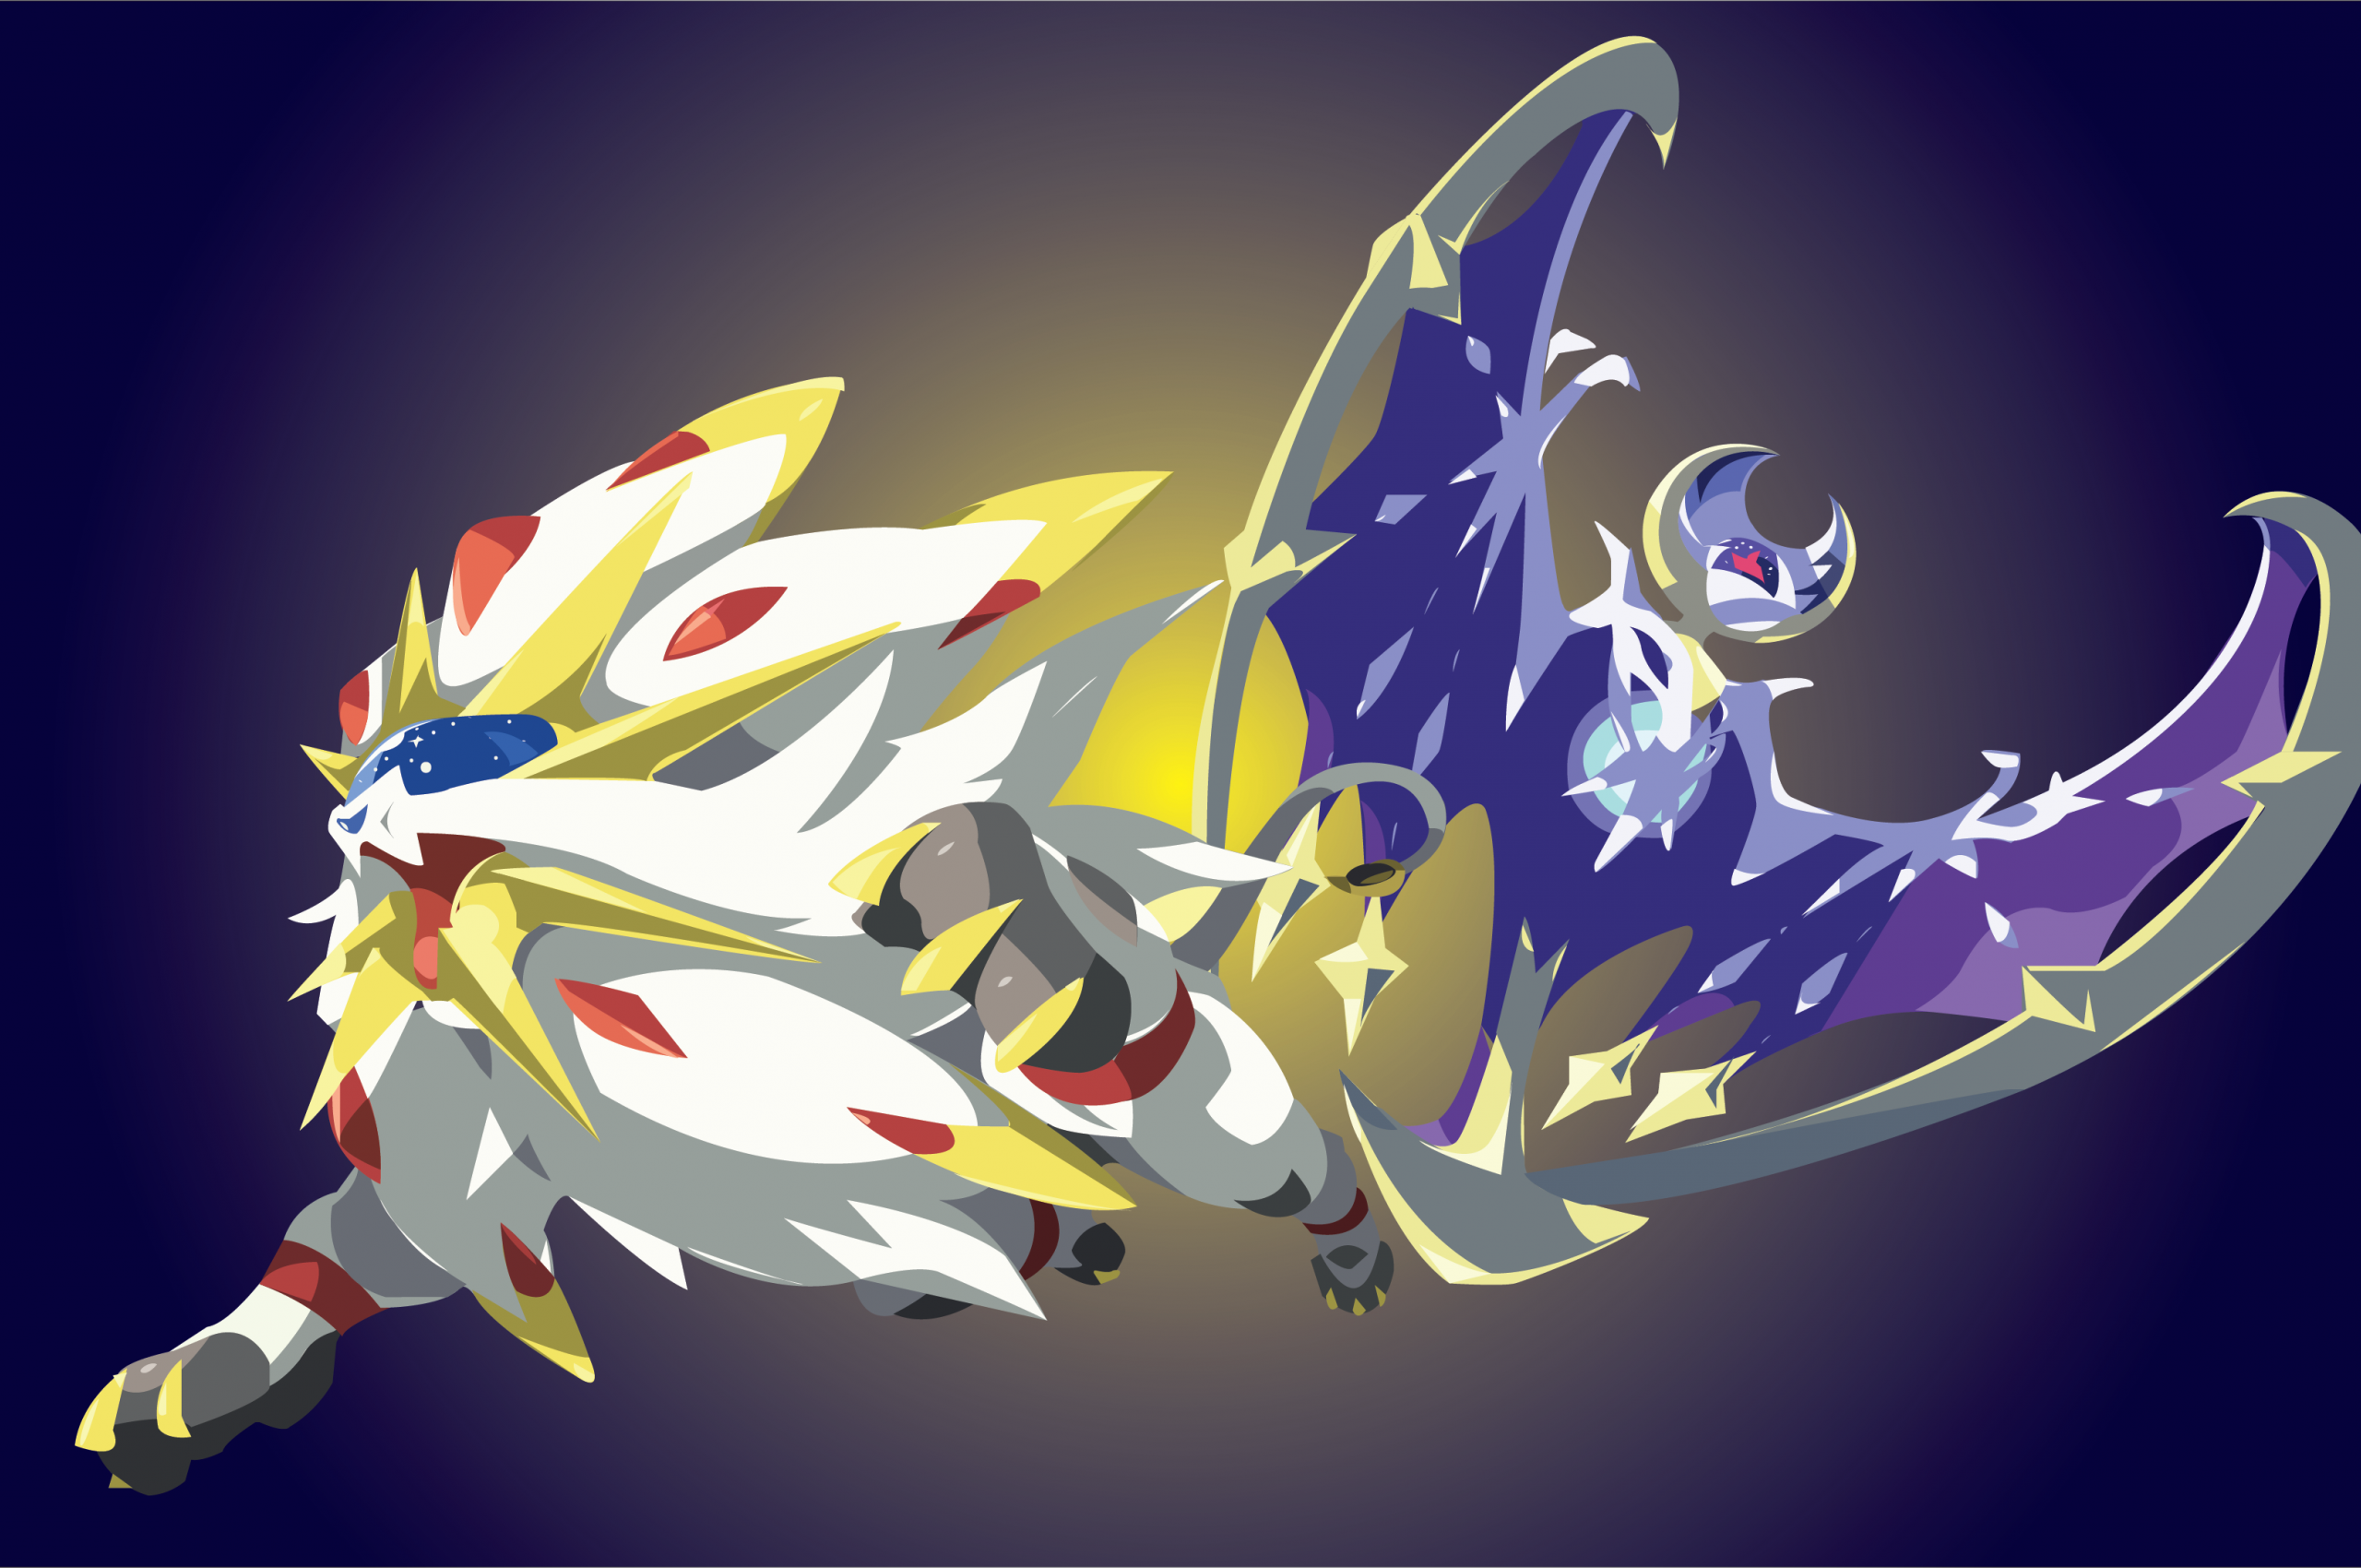 Free download Solgaleo and Lunala 4k Ultra HD Wallpaper Backgrounds.